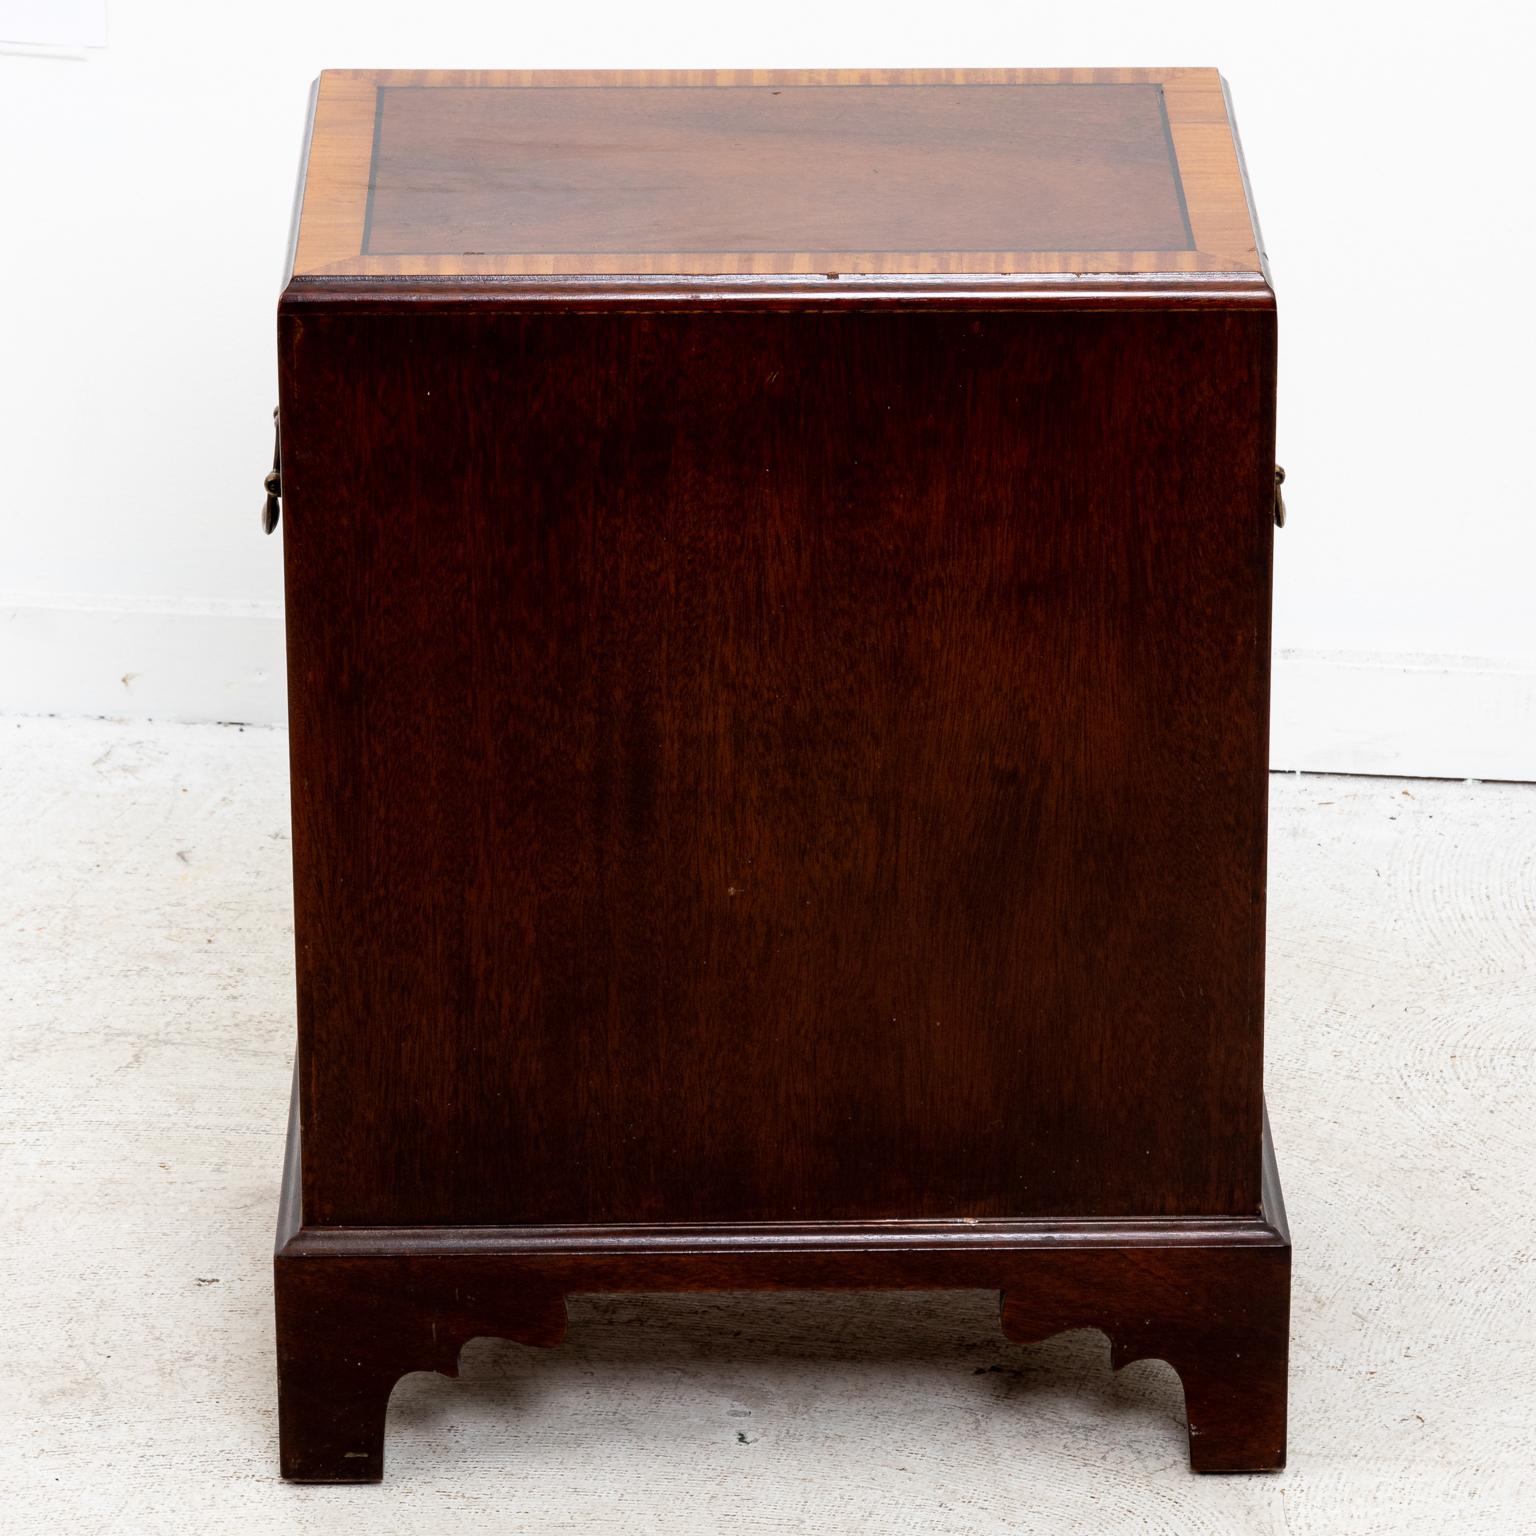 Pair of small size mahogany three-tier chest of drawers featured with metal handles on the drawer fronts, light wood accent trim, and bracket feet. The chests also come with metal handles on the sides for transport. Please note of wear consistent